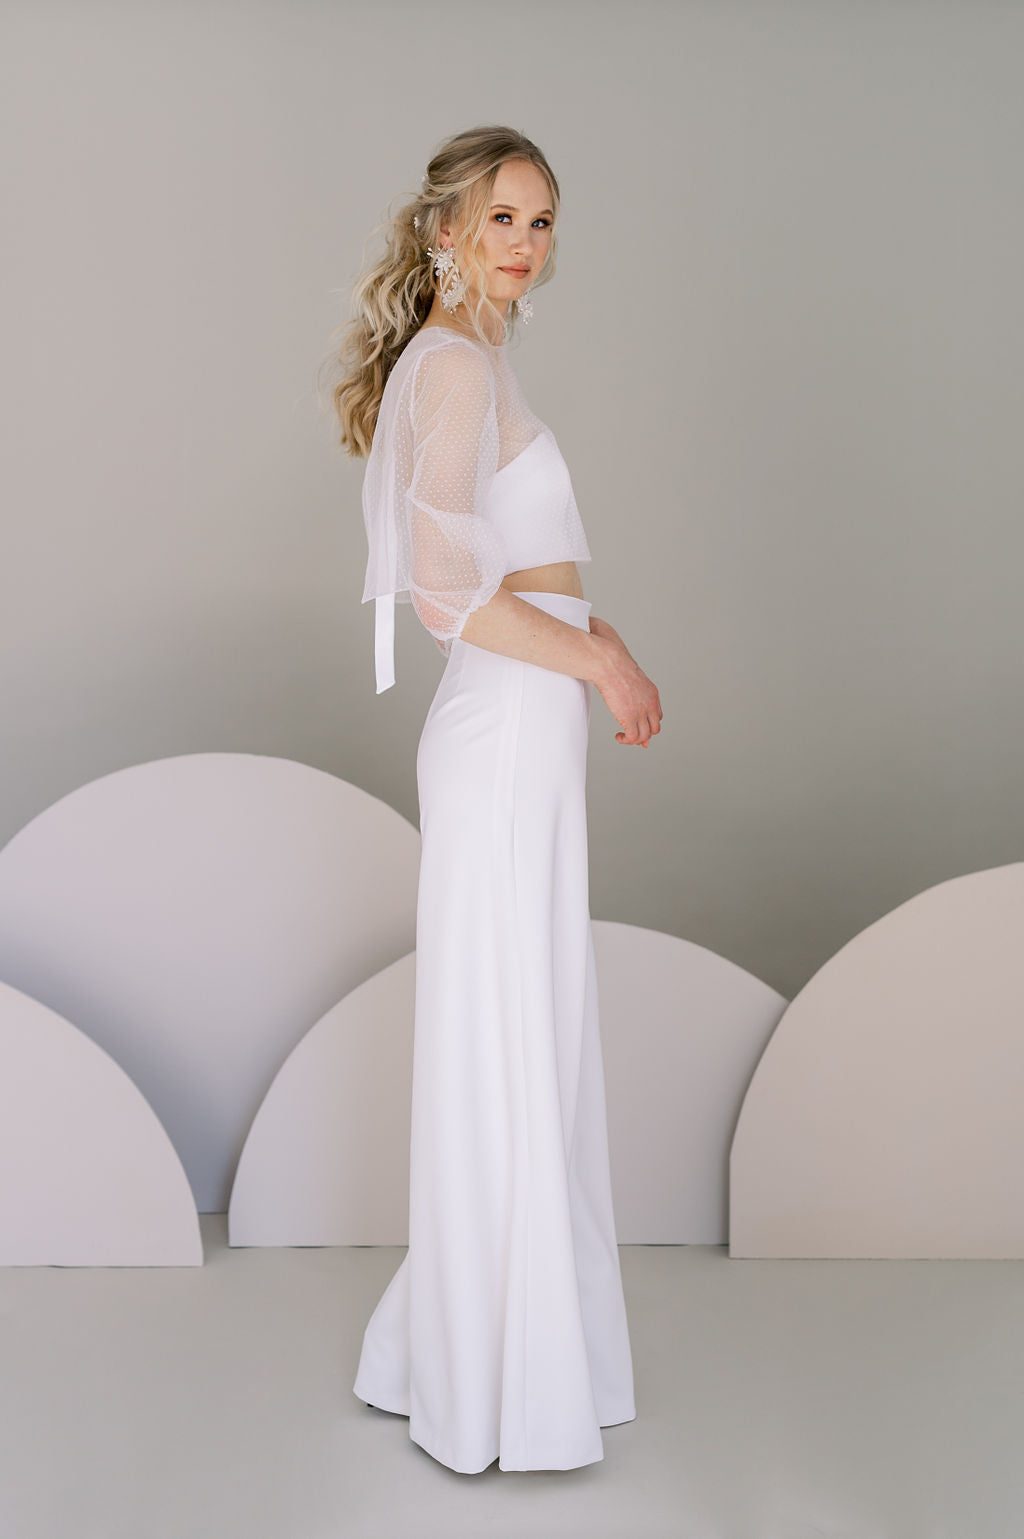 Chic bride wedding pants for a casual bridal outfit. Stretch crepe palazzo trousers with a tapered fit at the waist. Designed by Catherine Langlois, Canada.